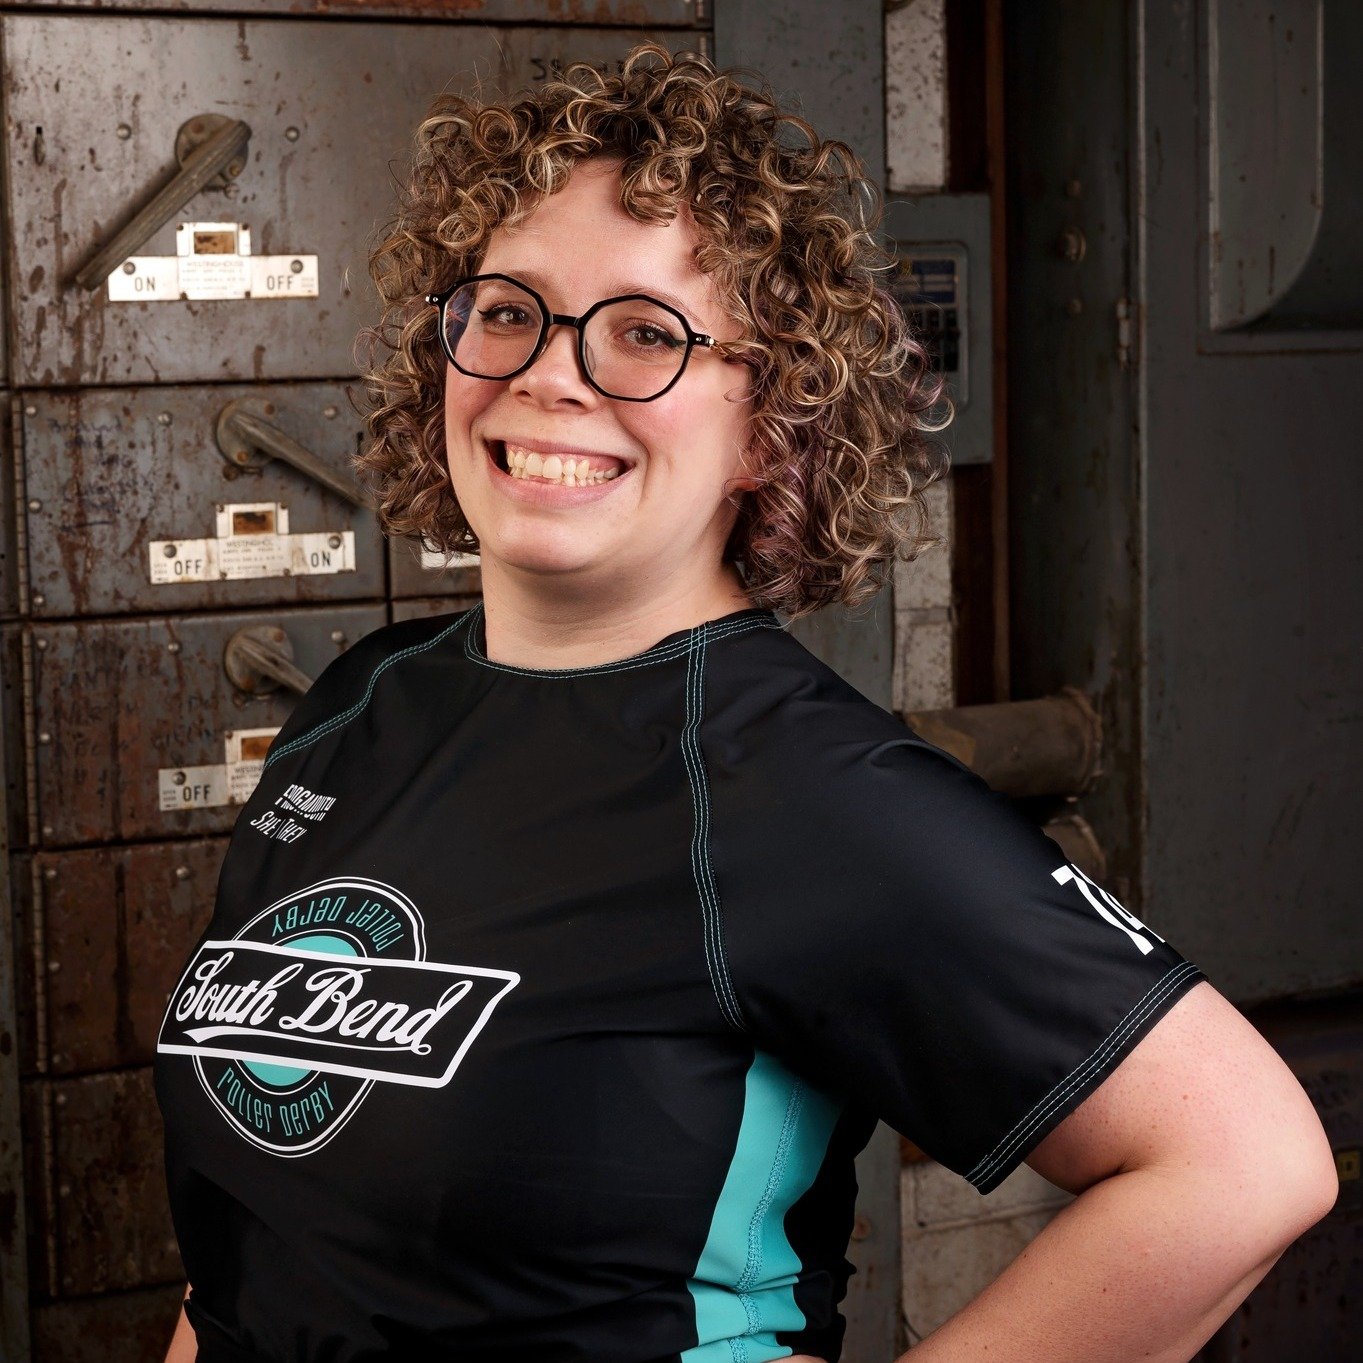 South Bend Roller Derby would like to wish a very Happy Birthday to #74, Chatterbox! 

We hope your day is just as great as you are!